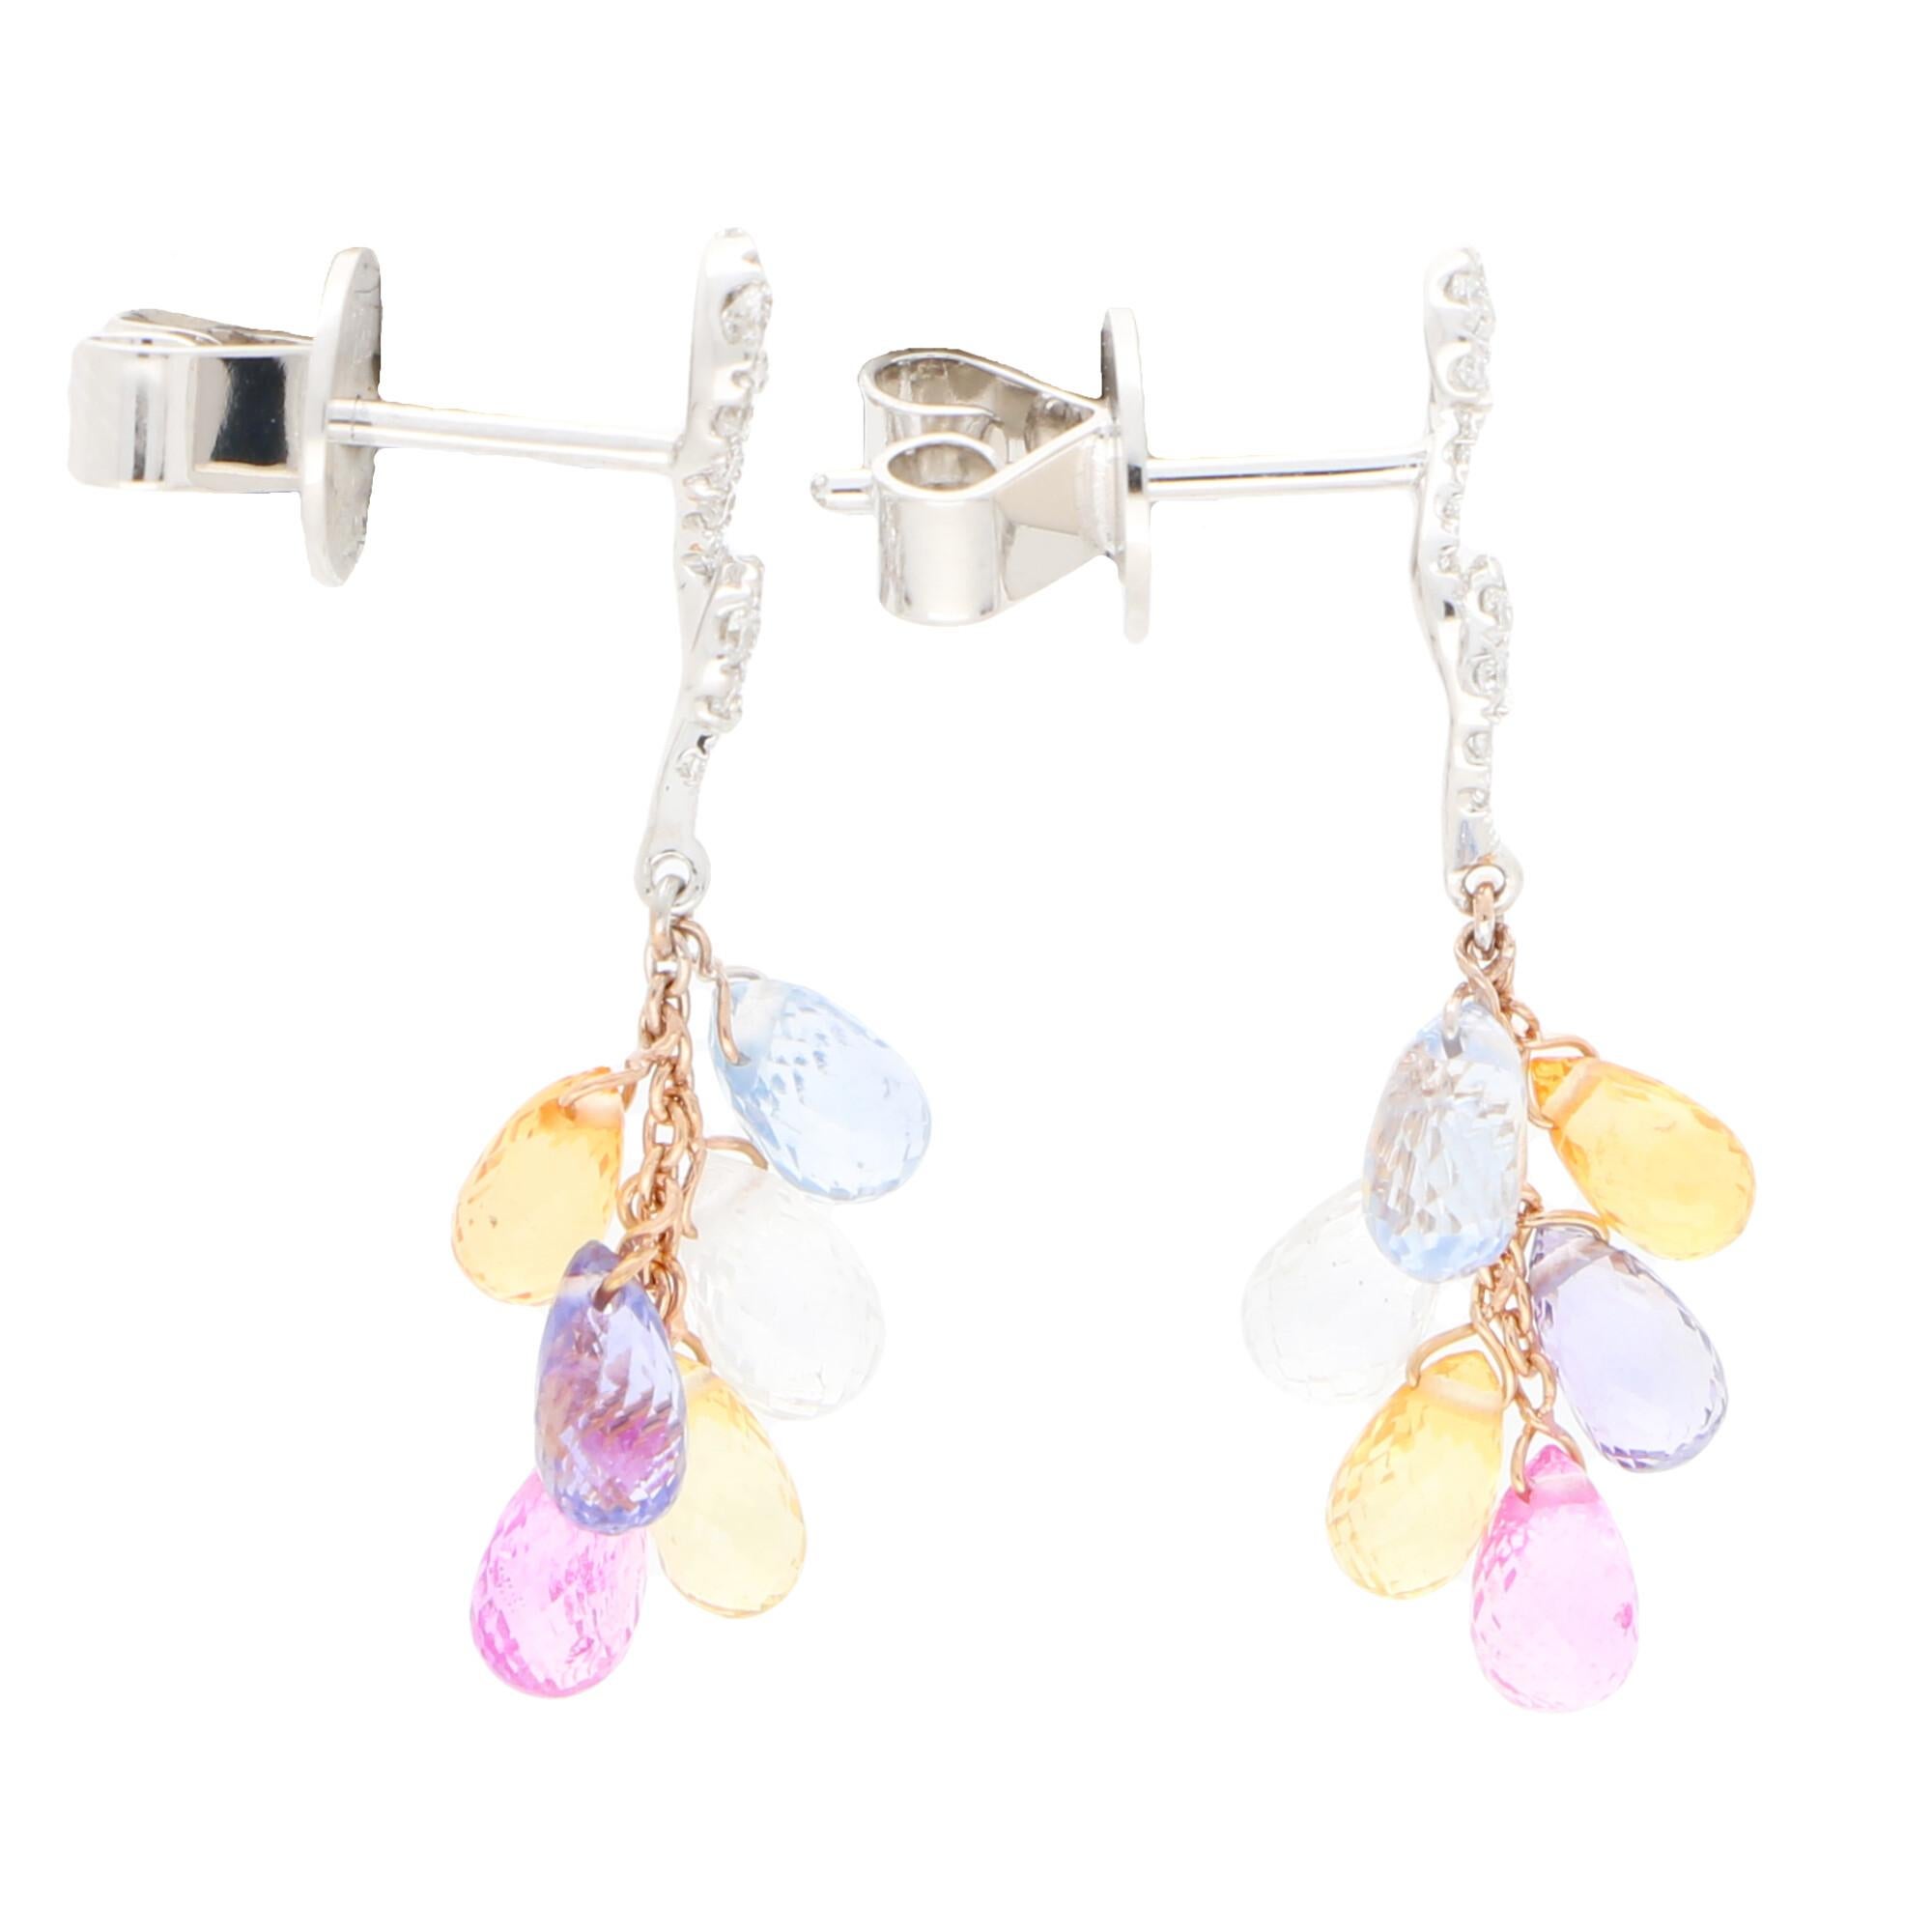 Briolette Cut Pastel Rainbow Sapphire and Diamond Drop Earrings Set in 18k White and Rose Gold